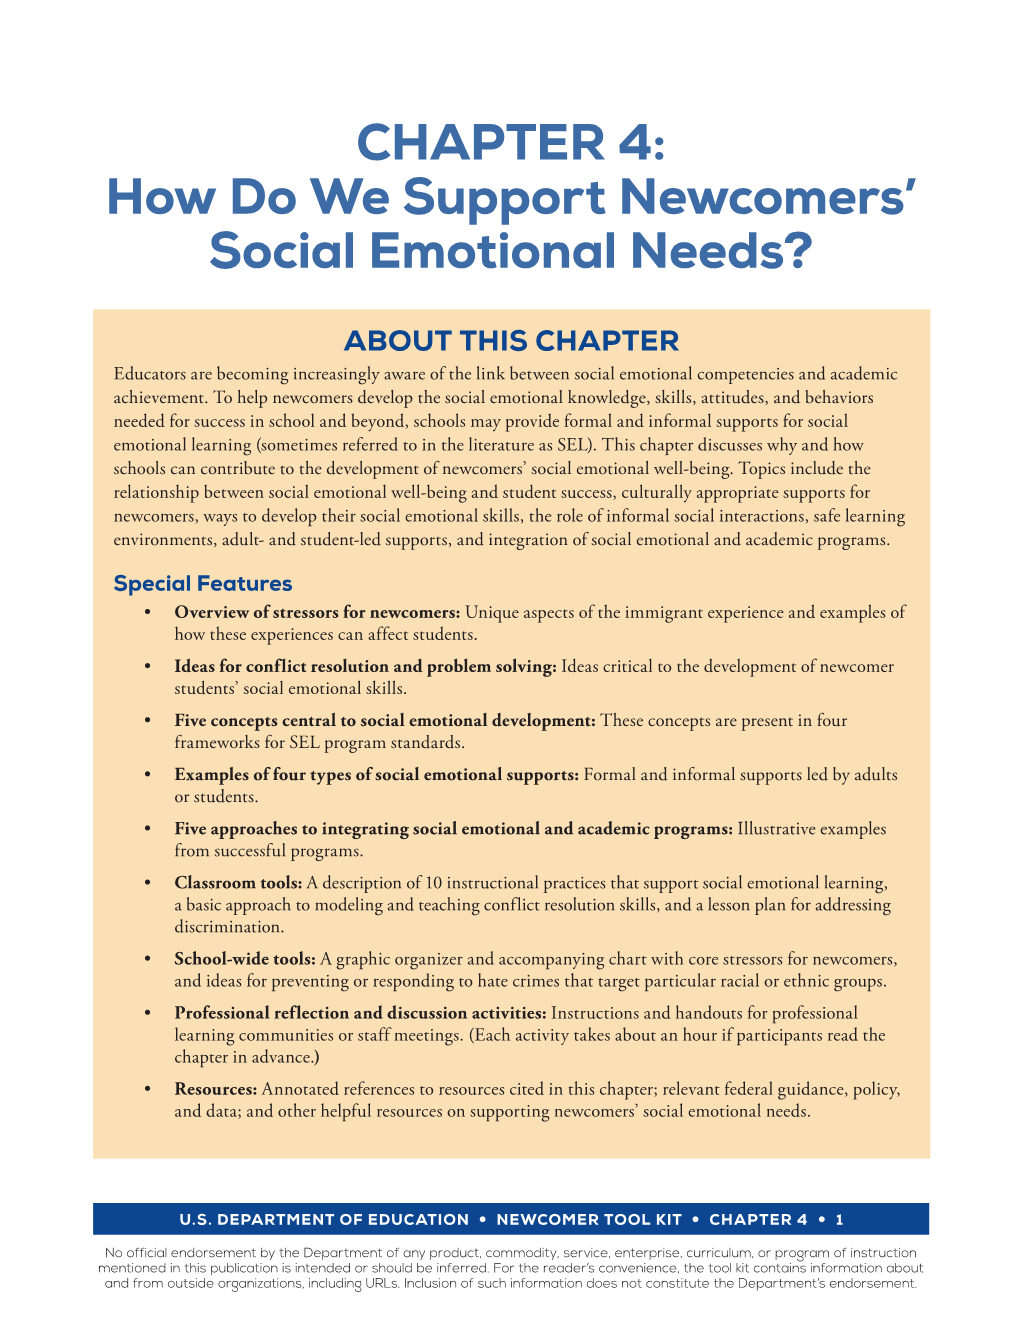 How Do We Support Newcomers' Social Emotional Needs?